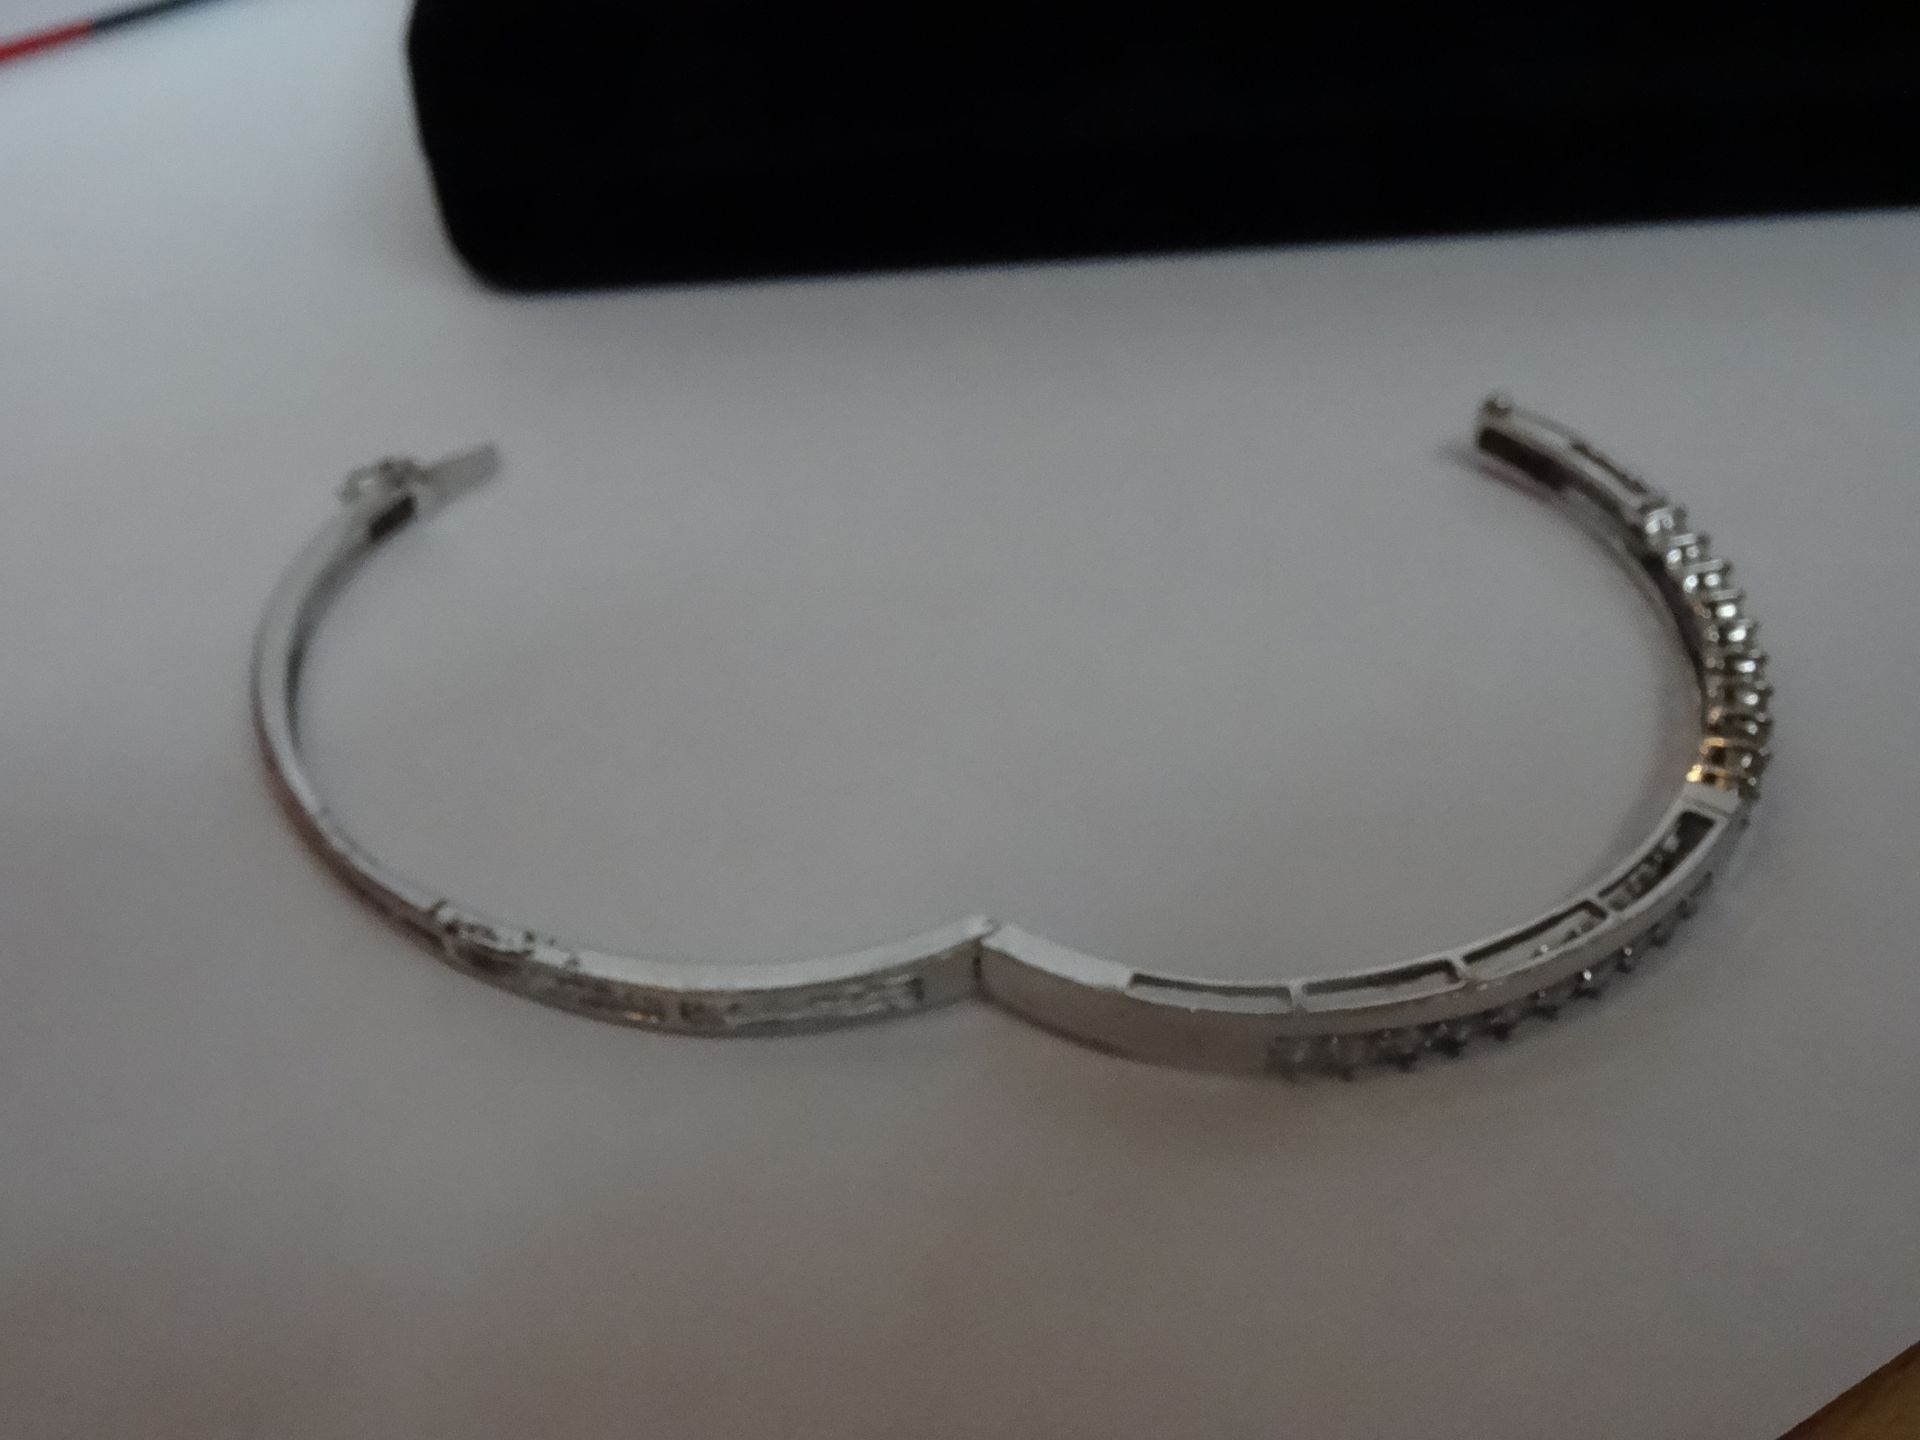 9 Carat White Gold Clear Stone Hinged Bangle. Contains 20 x 2.75mm Clear Stones. - Image 5 of 6